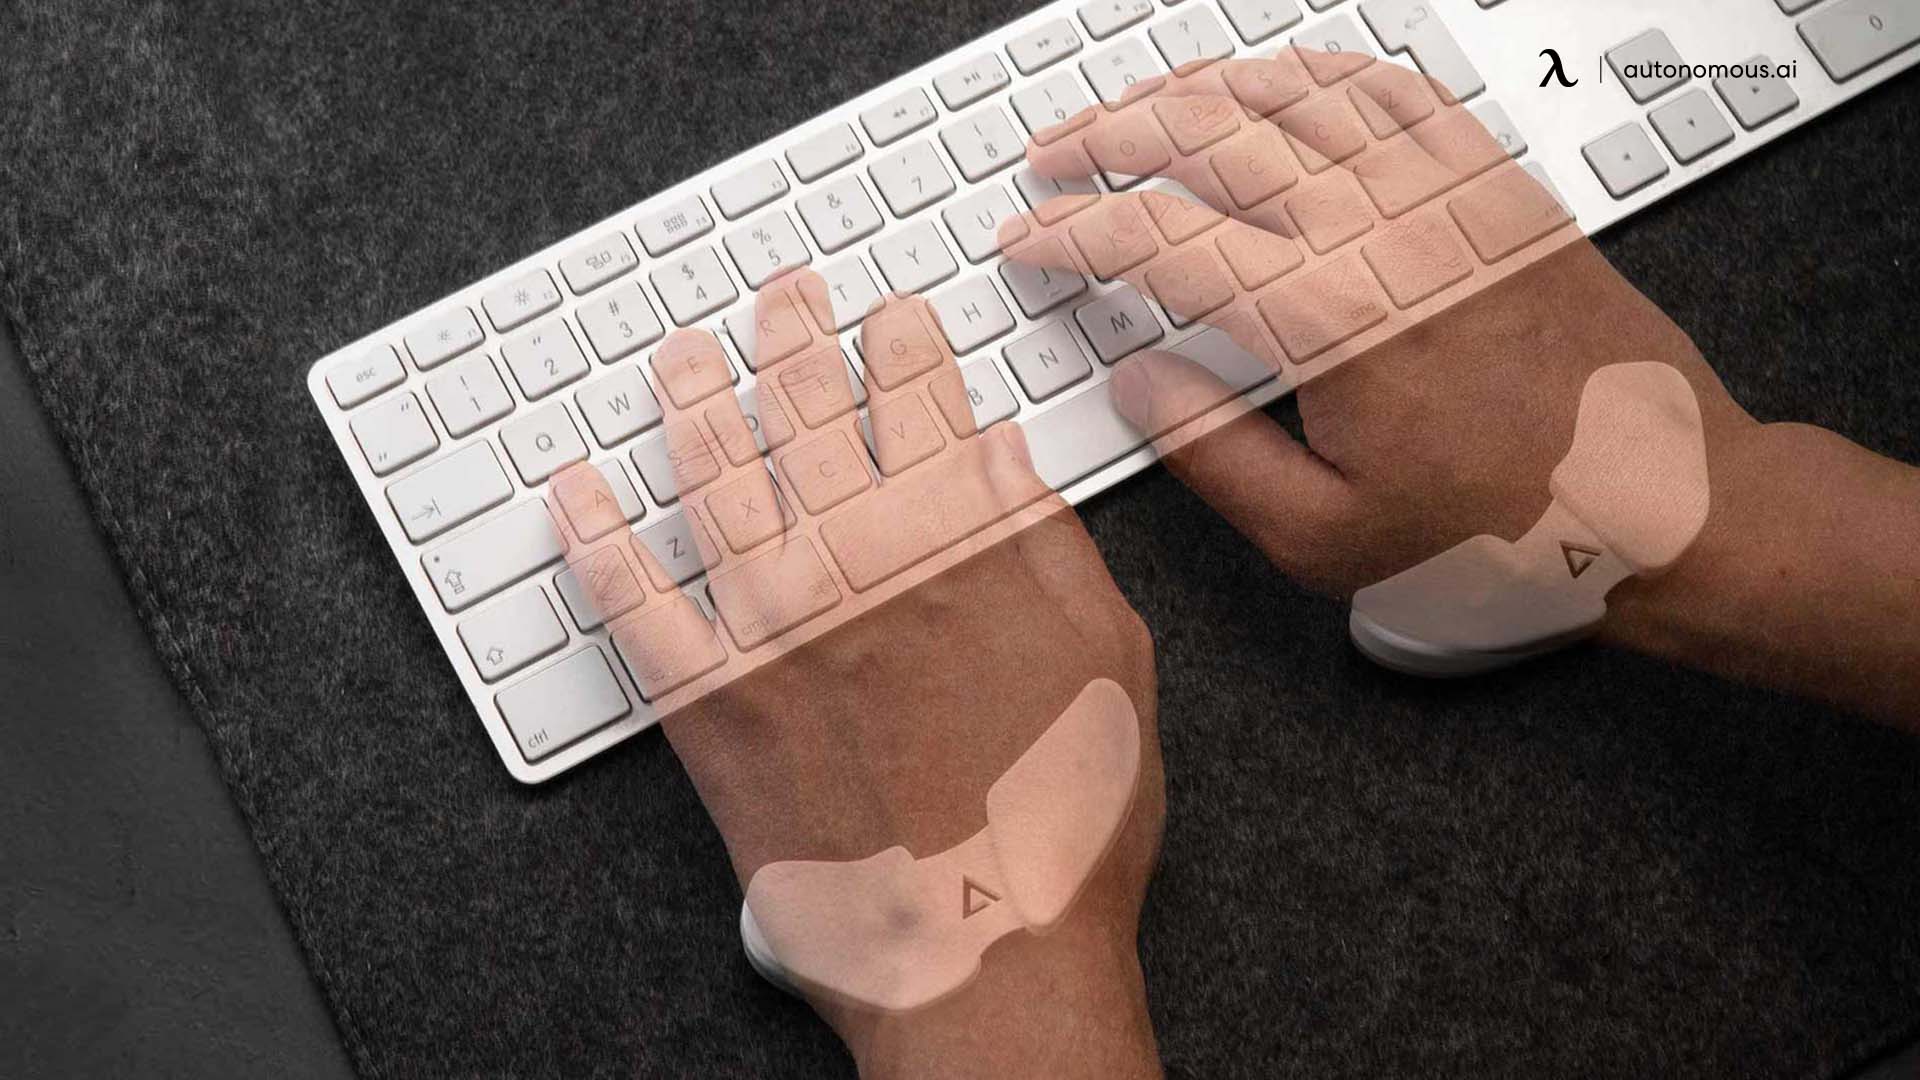 How Do Wrist Rests Work?